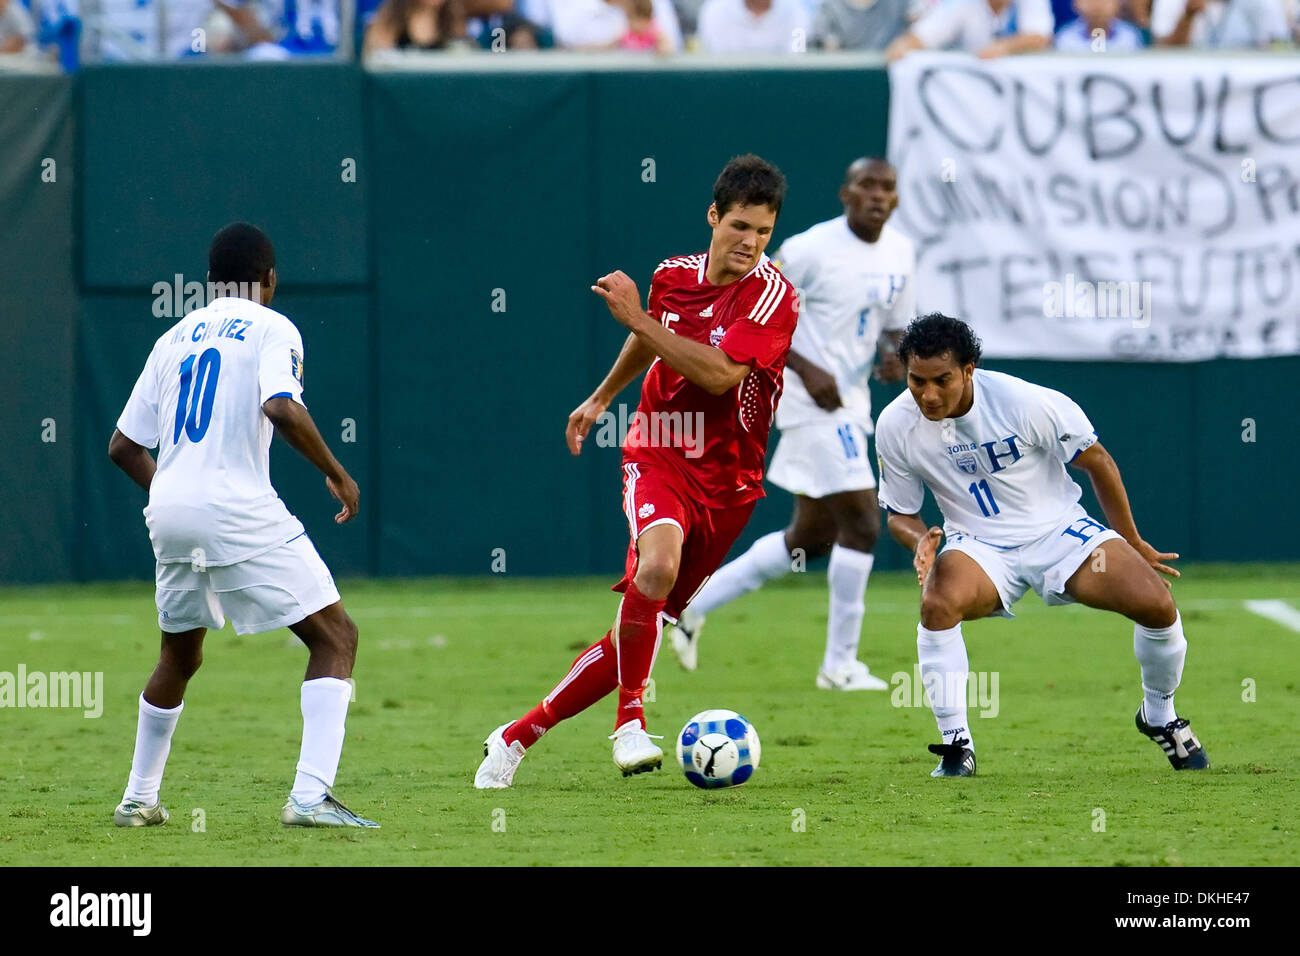 Canada's midfielder Josh Simpson (15) trying to split the Honduras' defense of attacker Marvin Chavez (10) and defender Mariano Acevedo (11) during the CONCACAF Gold Cup quarter finals match between Canada and Honduras at Lincoln Financial Field in Philadelphia, Pennsylvania.  Honduras beat Canada, 1-0. (Credit Image: © Chris Szagola/Southcreek Global/ZUMApress.com) Stock Photo